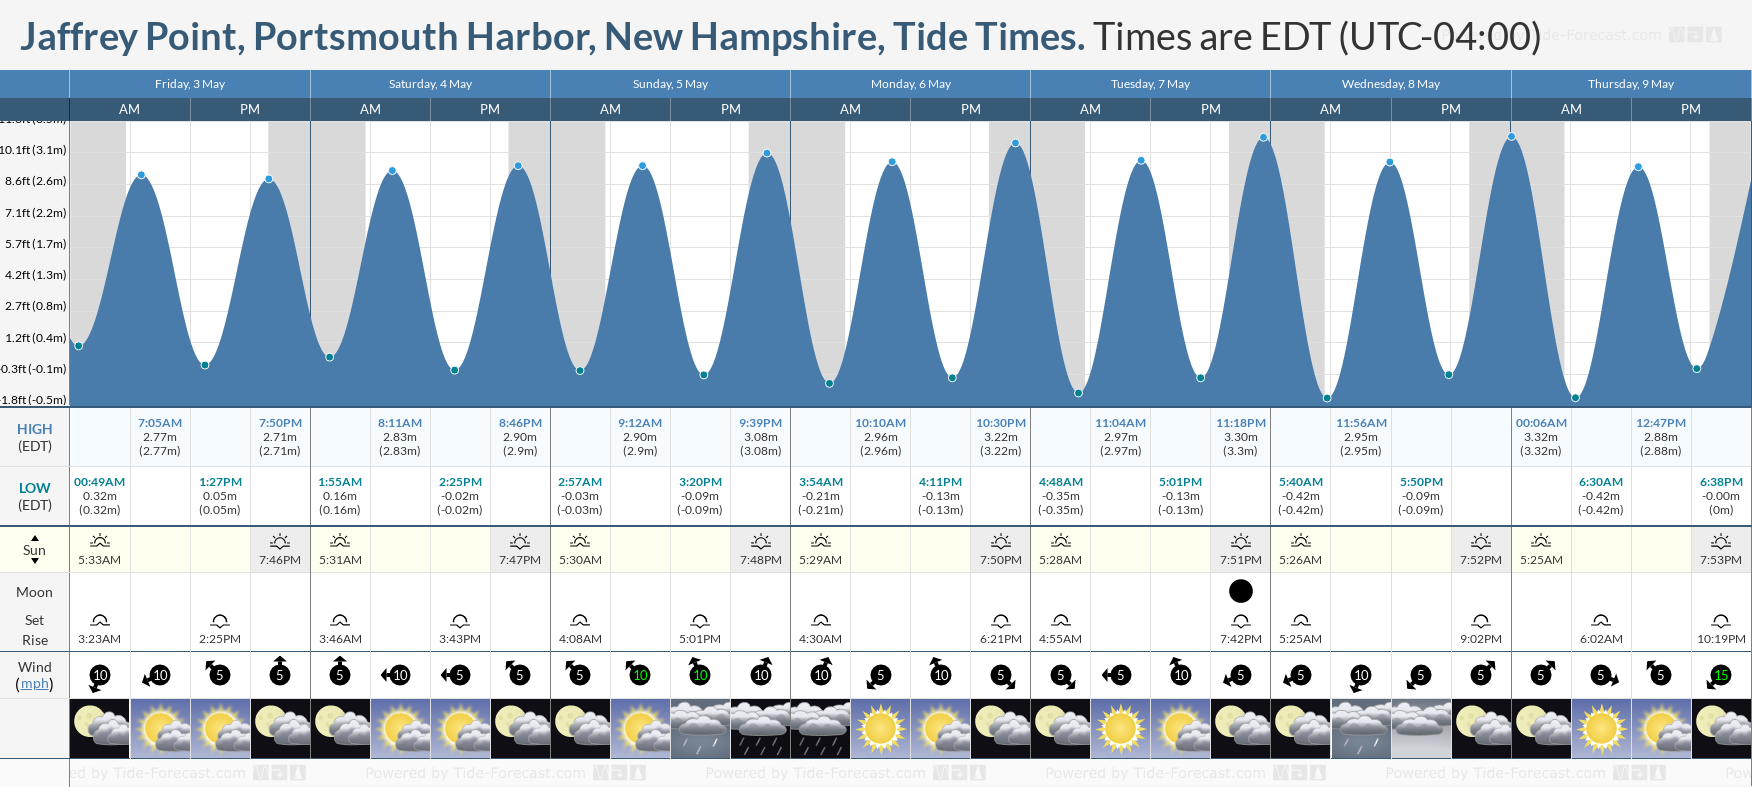 Jaffrey Point, Portsmouth Harbor, New Hampshire Tide Chart including high and low tide tide times for the next 7 days